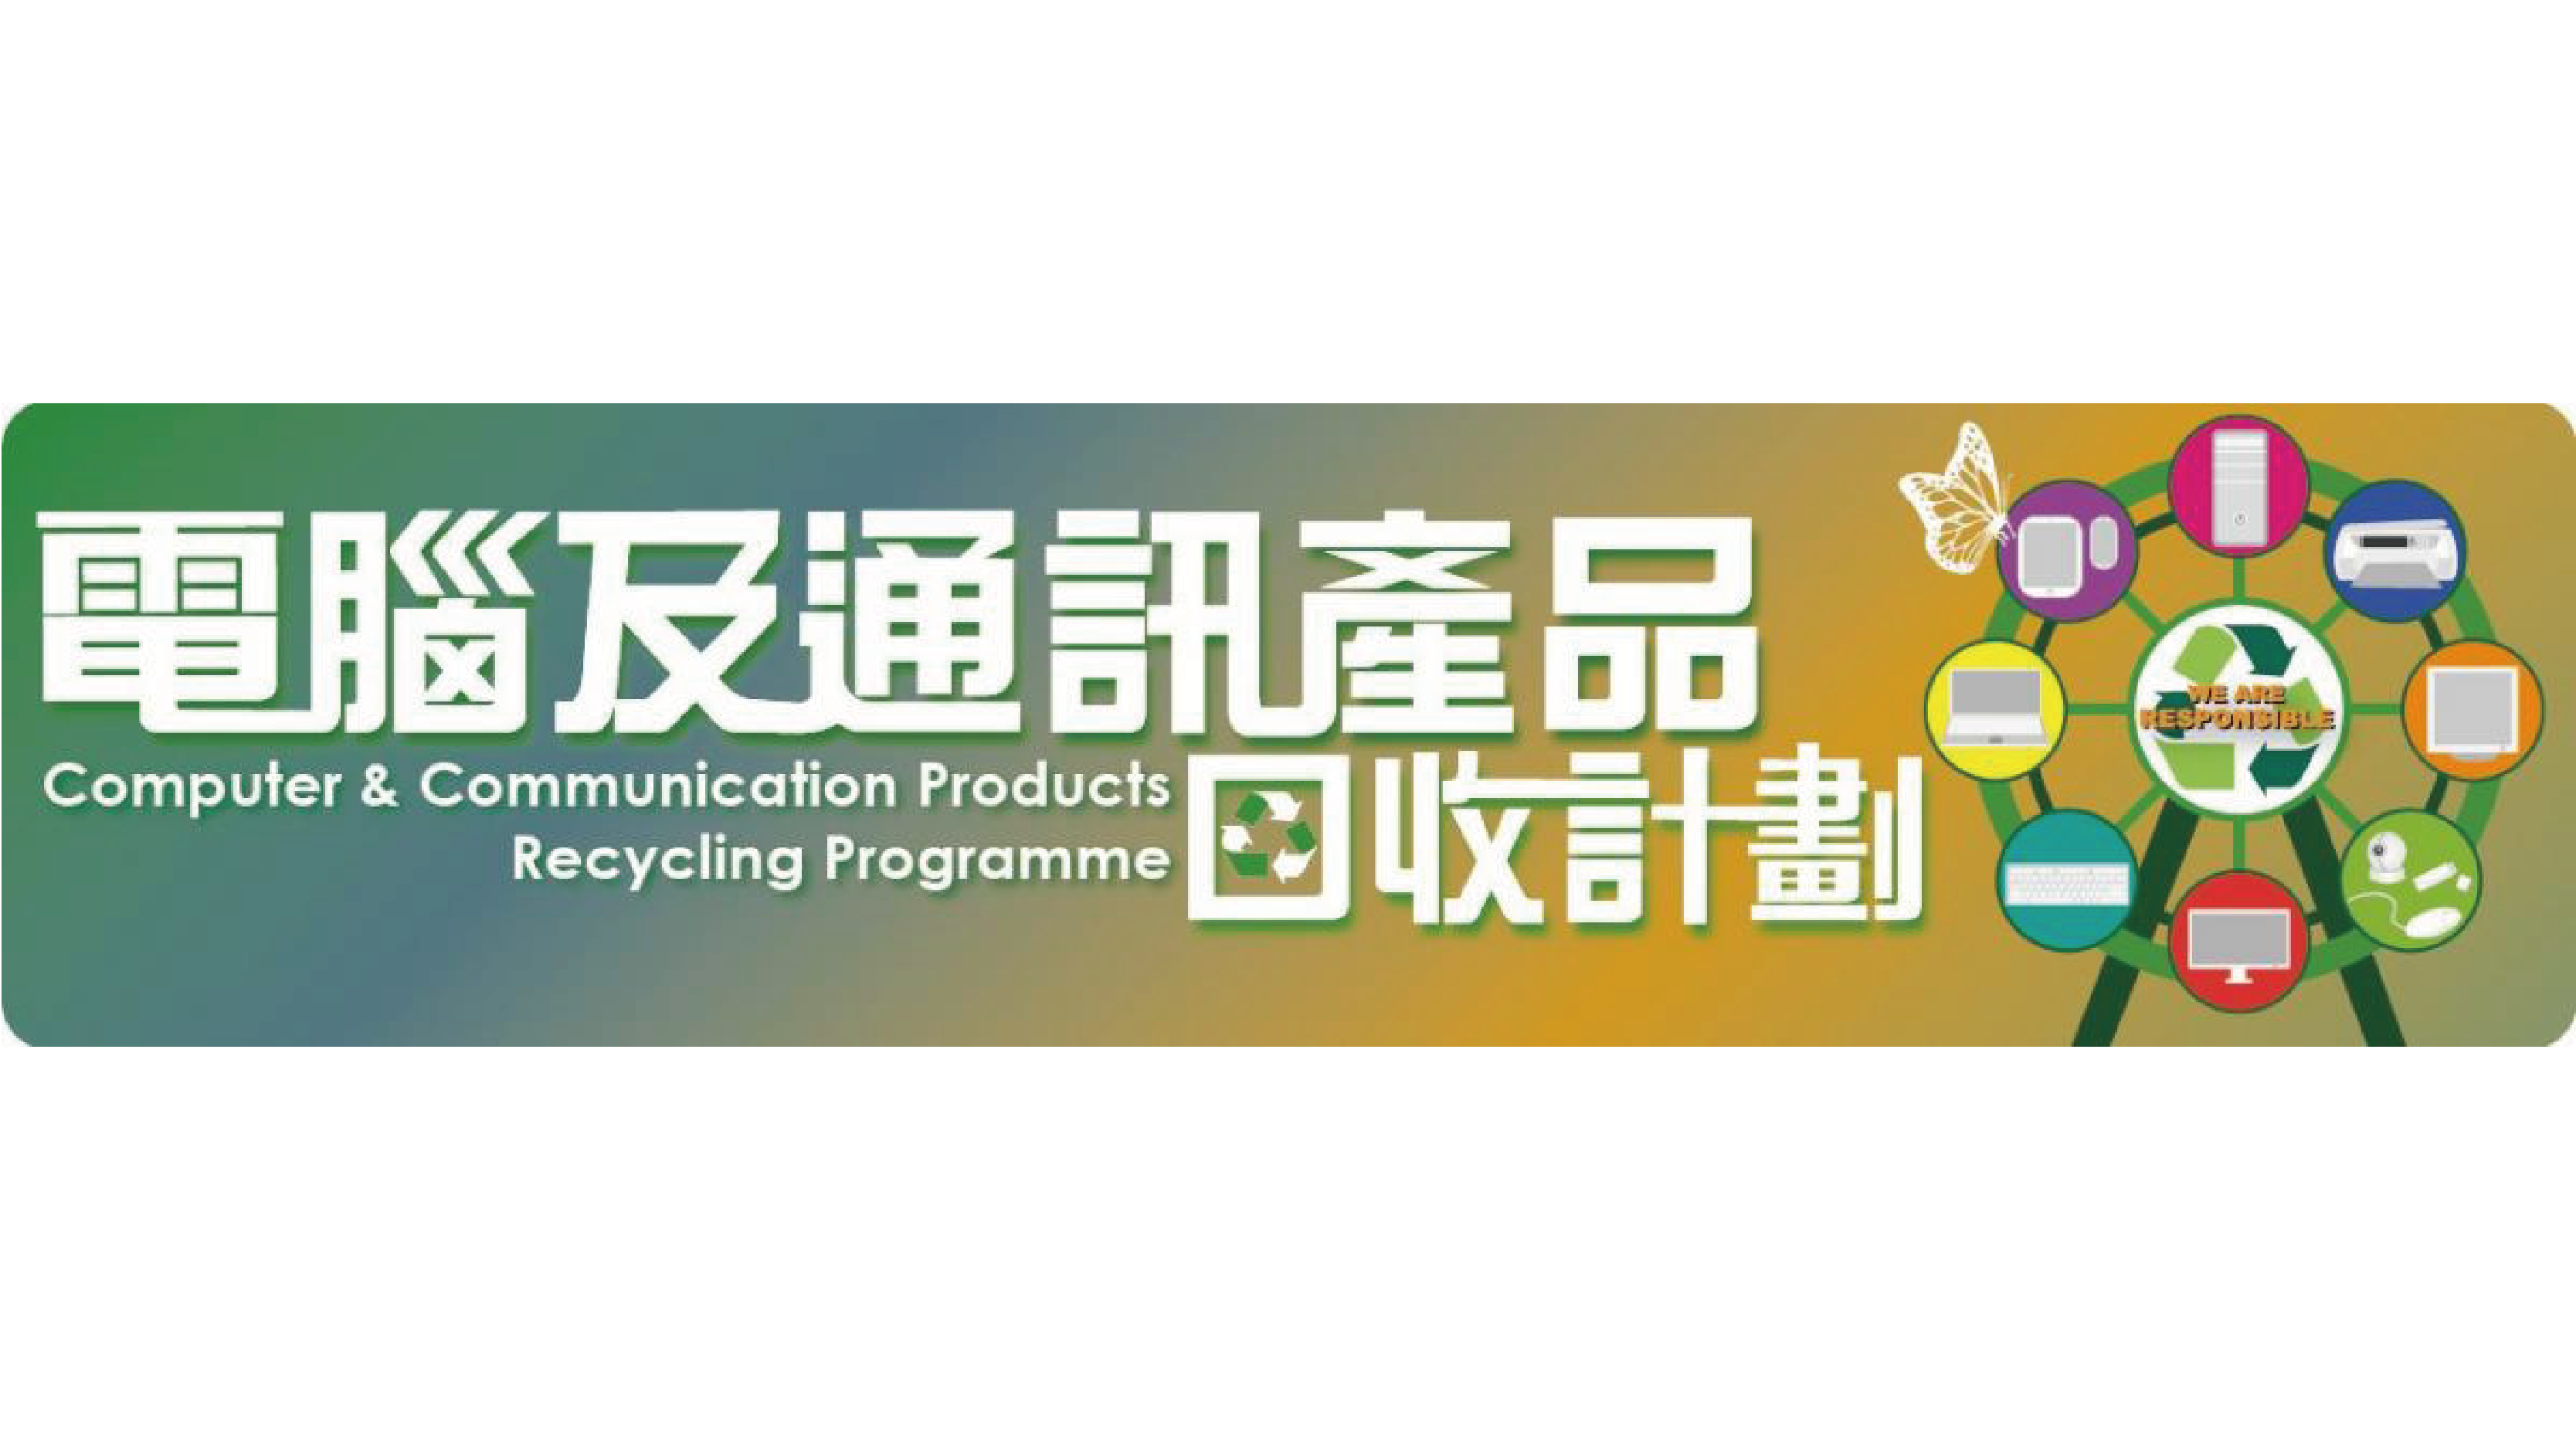 Computer and Communication Product Recycling Programme